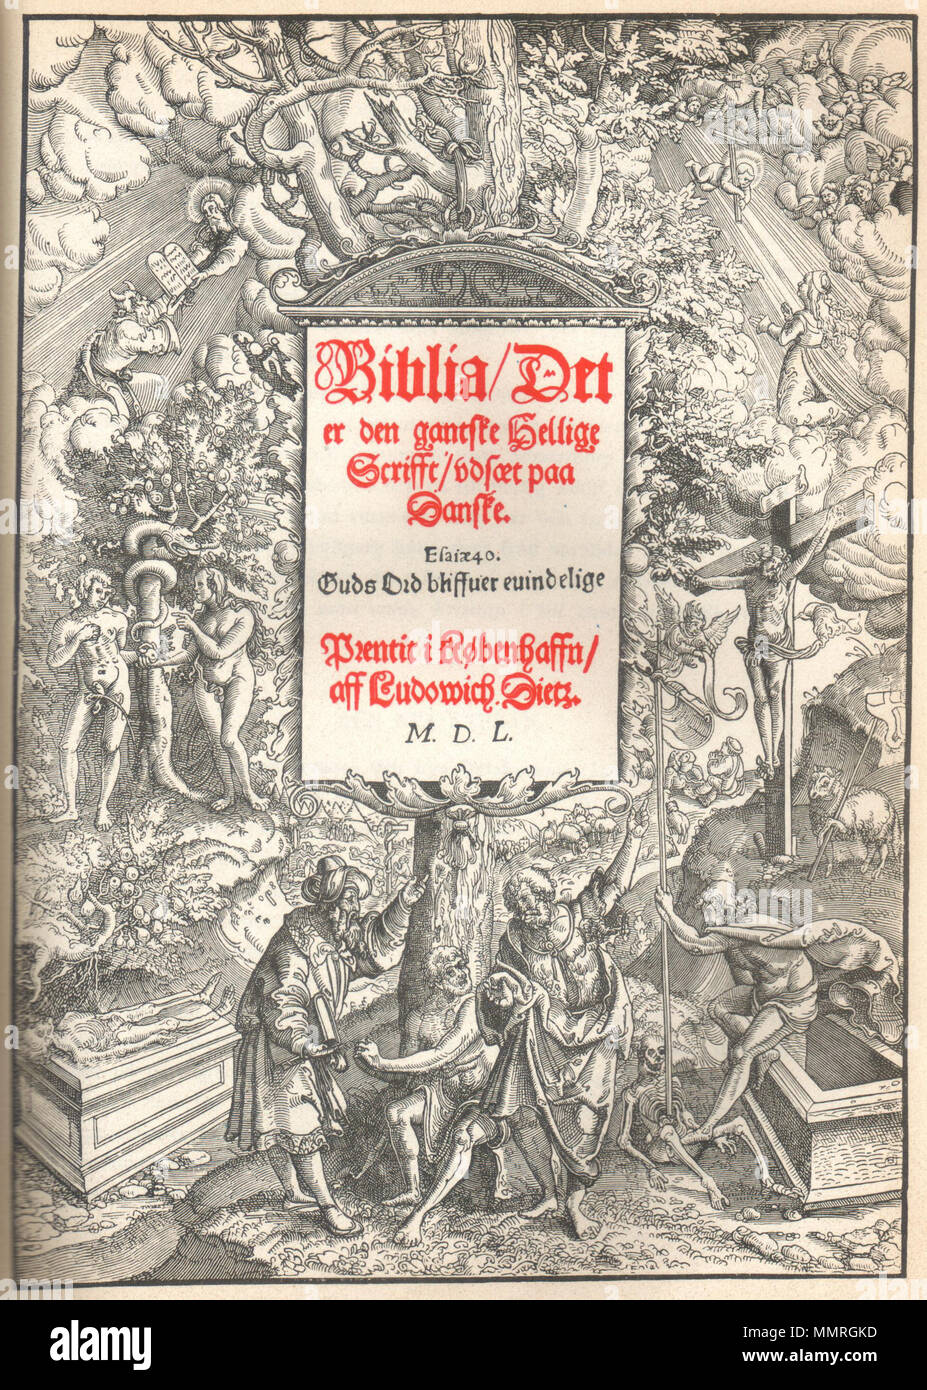 . English: Cover of Christian III:s Bible, the first complete translation of the Bible to Danish. A large tree divides the image between events from the Old Testament and the New Testament. On the left side, Old Testament, you can see Moses on Mount Sinai receiving the tablets of testimony from God. Also visible is the Fall of man and a coffin, as a symbol of death. The leaves of the tree are dry while on the right side (New Testament) the leaves are fresh, symbolizing the work of Christ. Also on the right side is the crucifixion. At the foot of the cross is John the Baptist and a Jewish rabbi Stock Photo